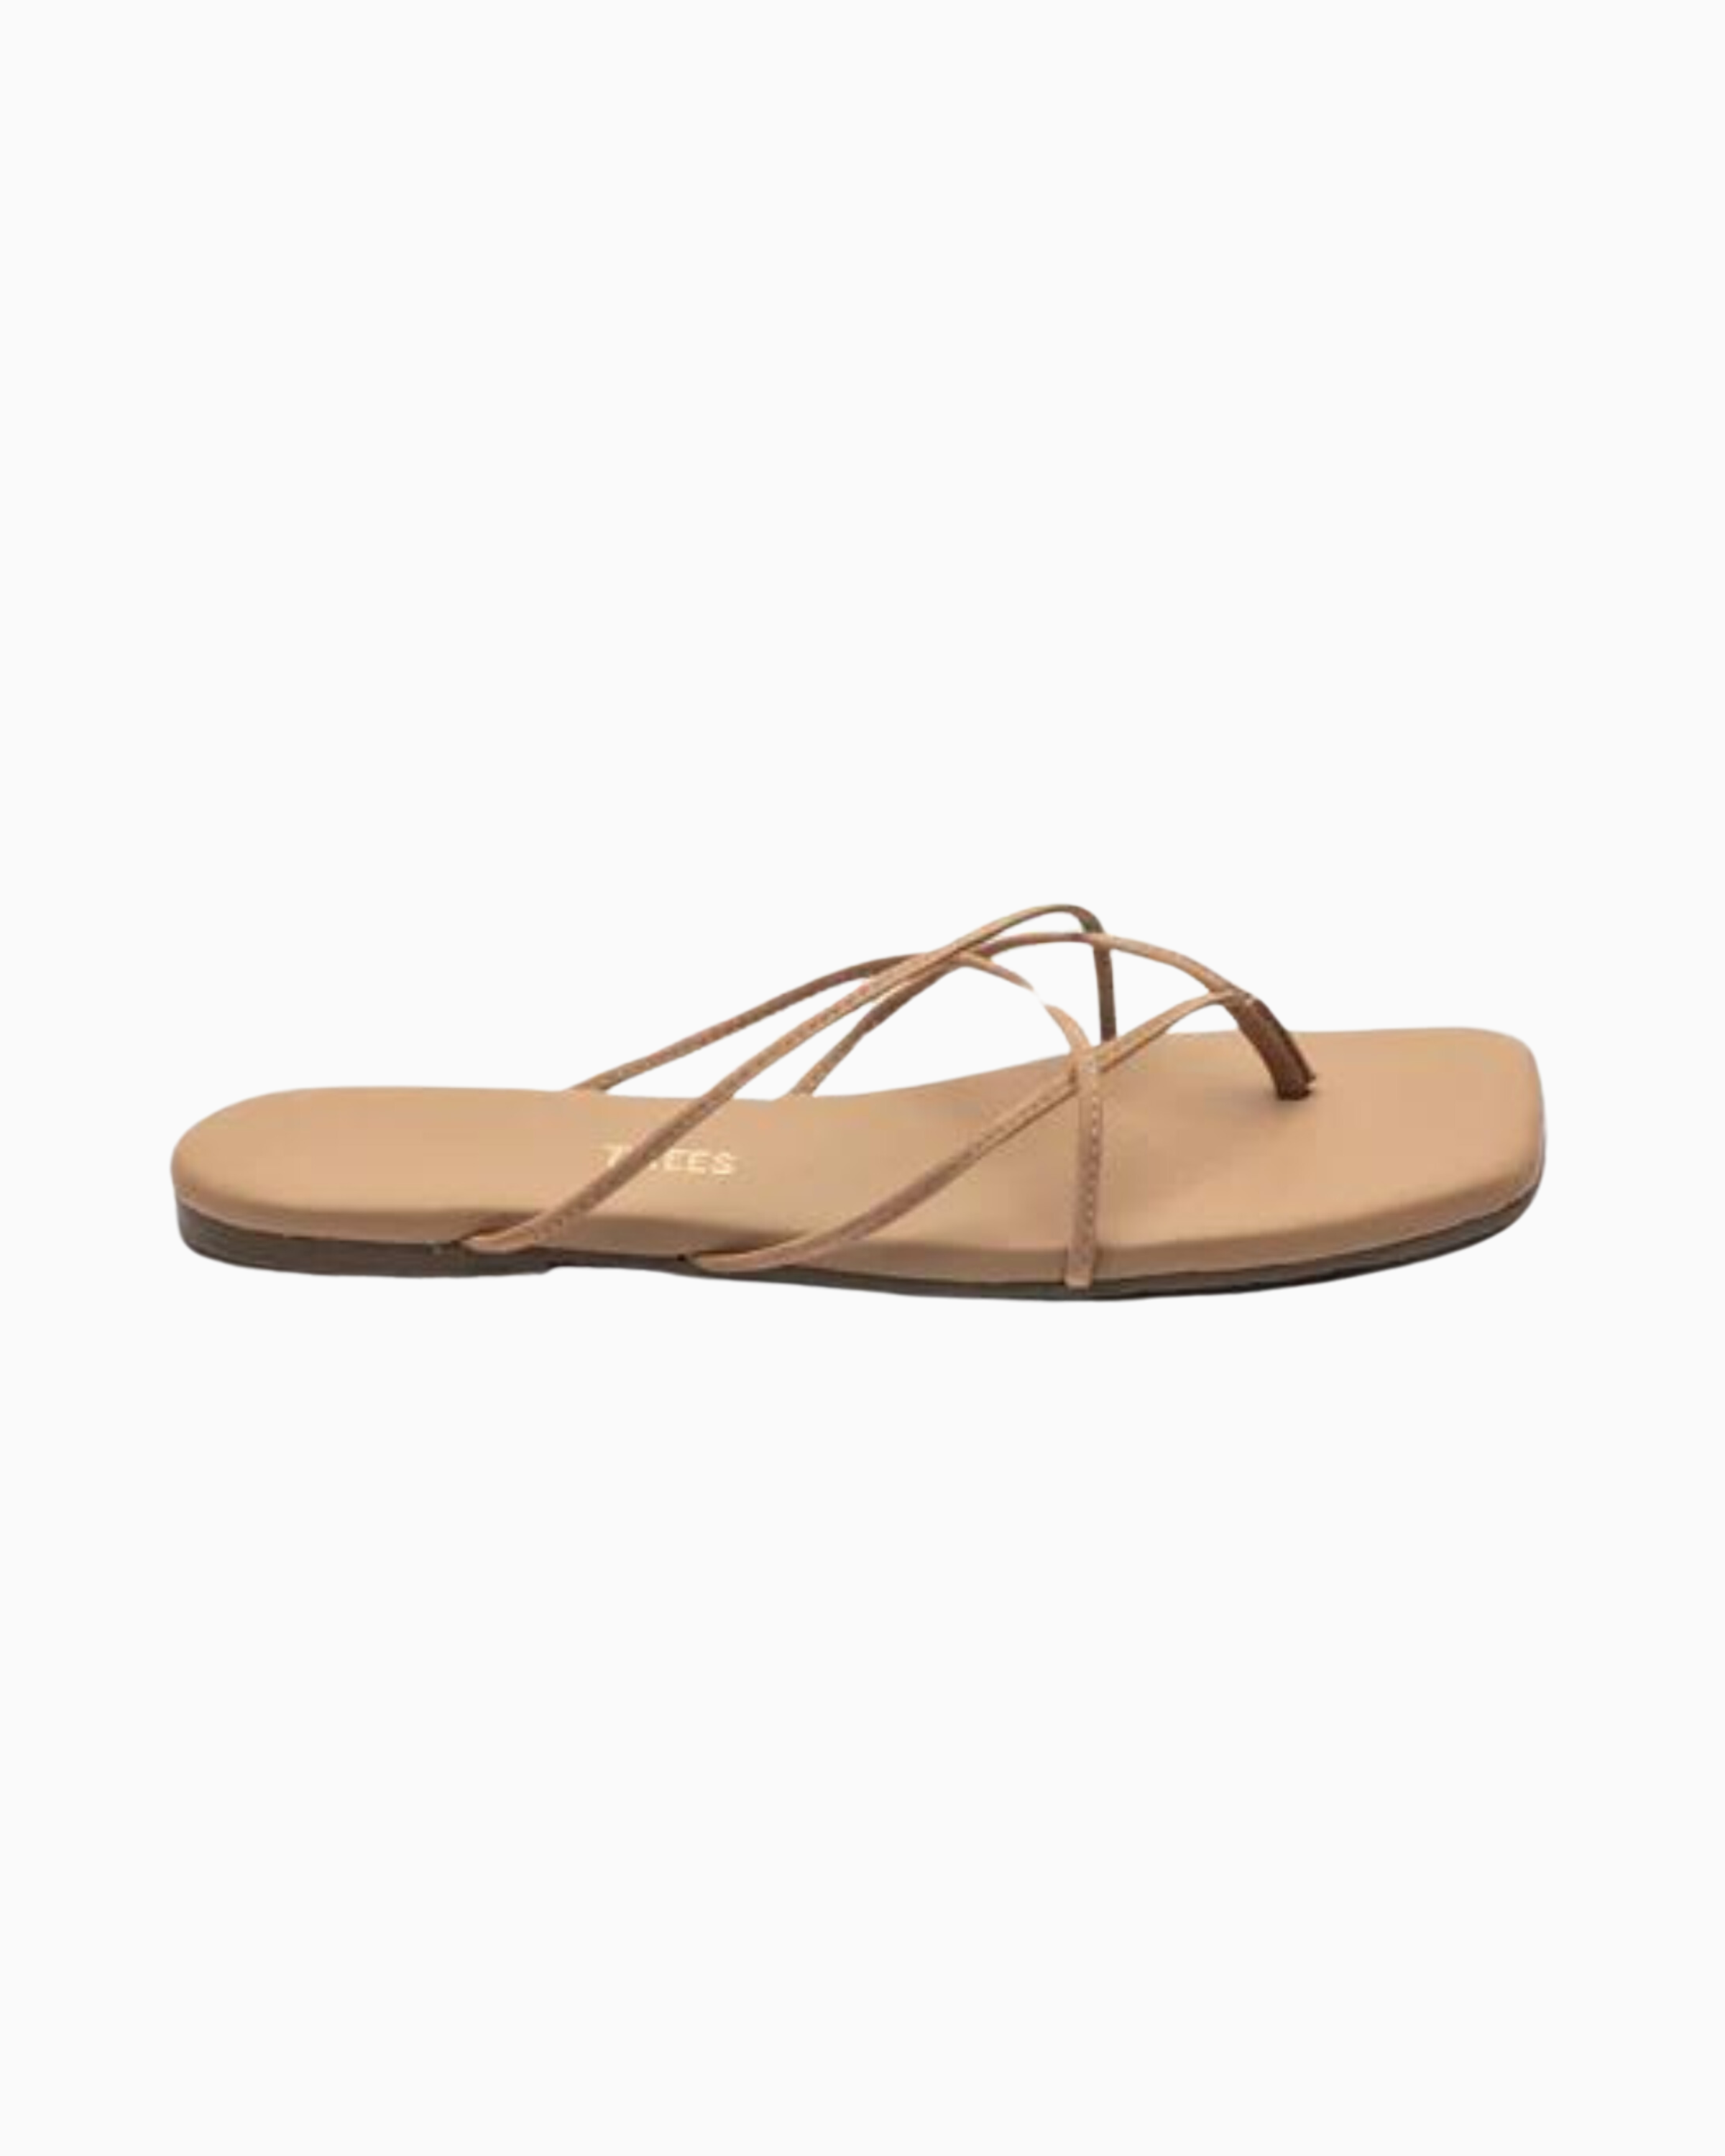 TKEES Square Toe Elle Sandal in Cocobutter